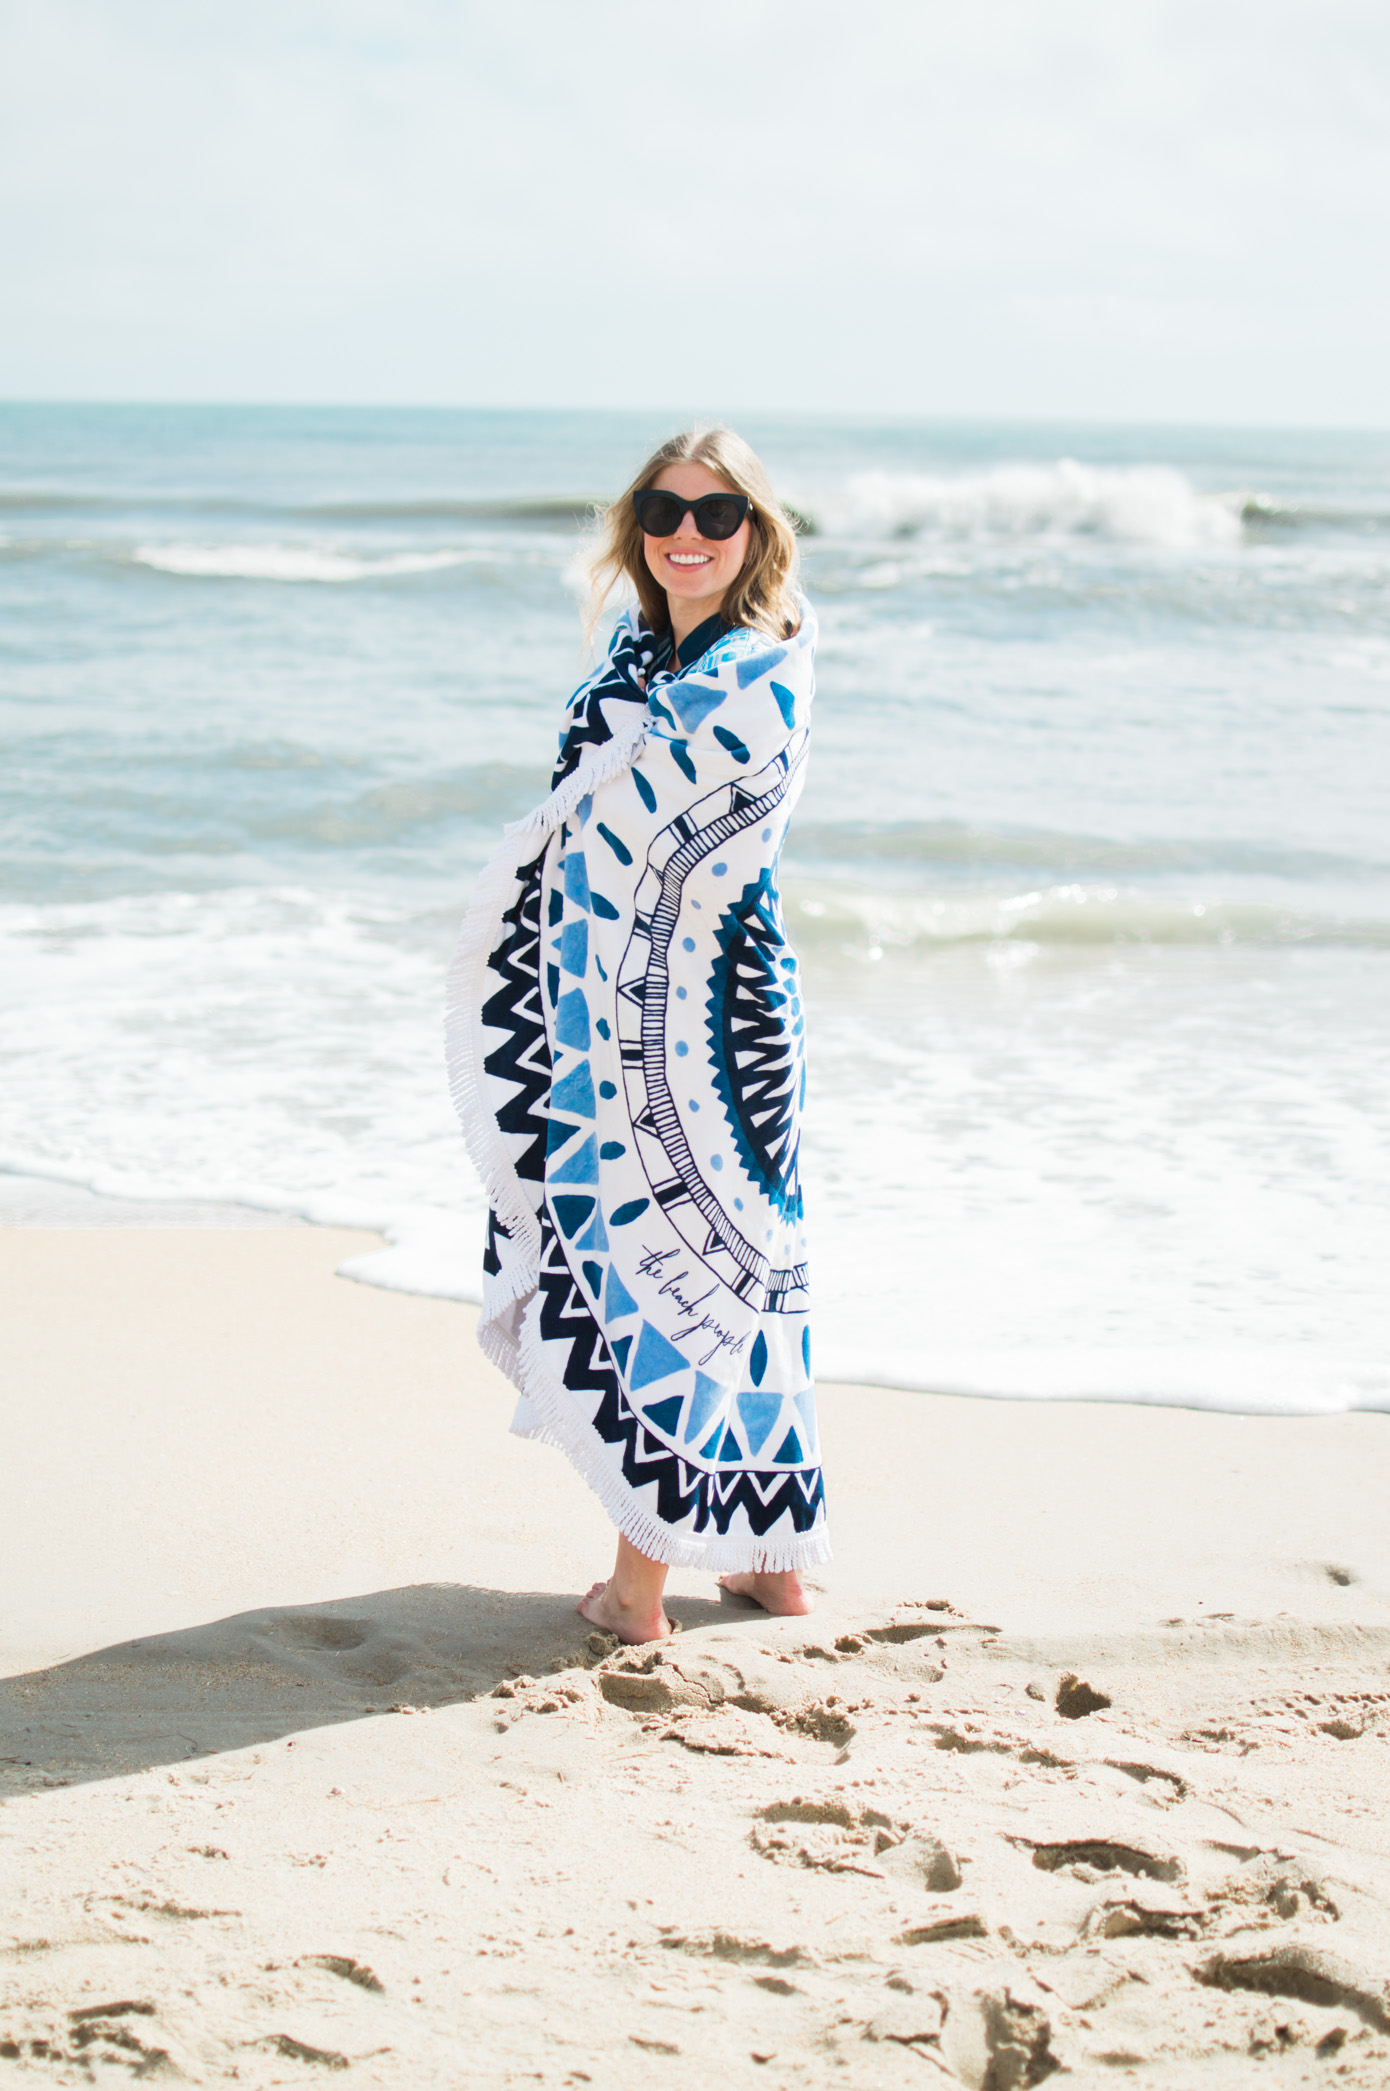 Tunic Dress // What to Wear to the Beach // Louella Reese Life & Style Blog